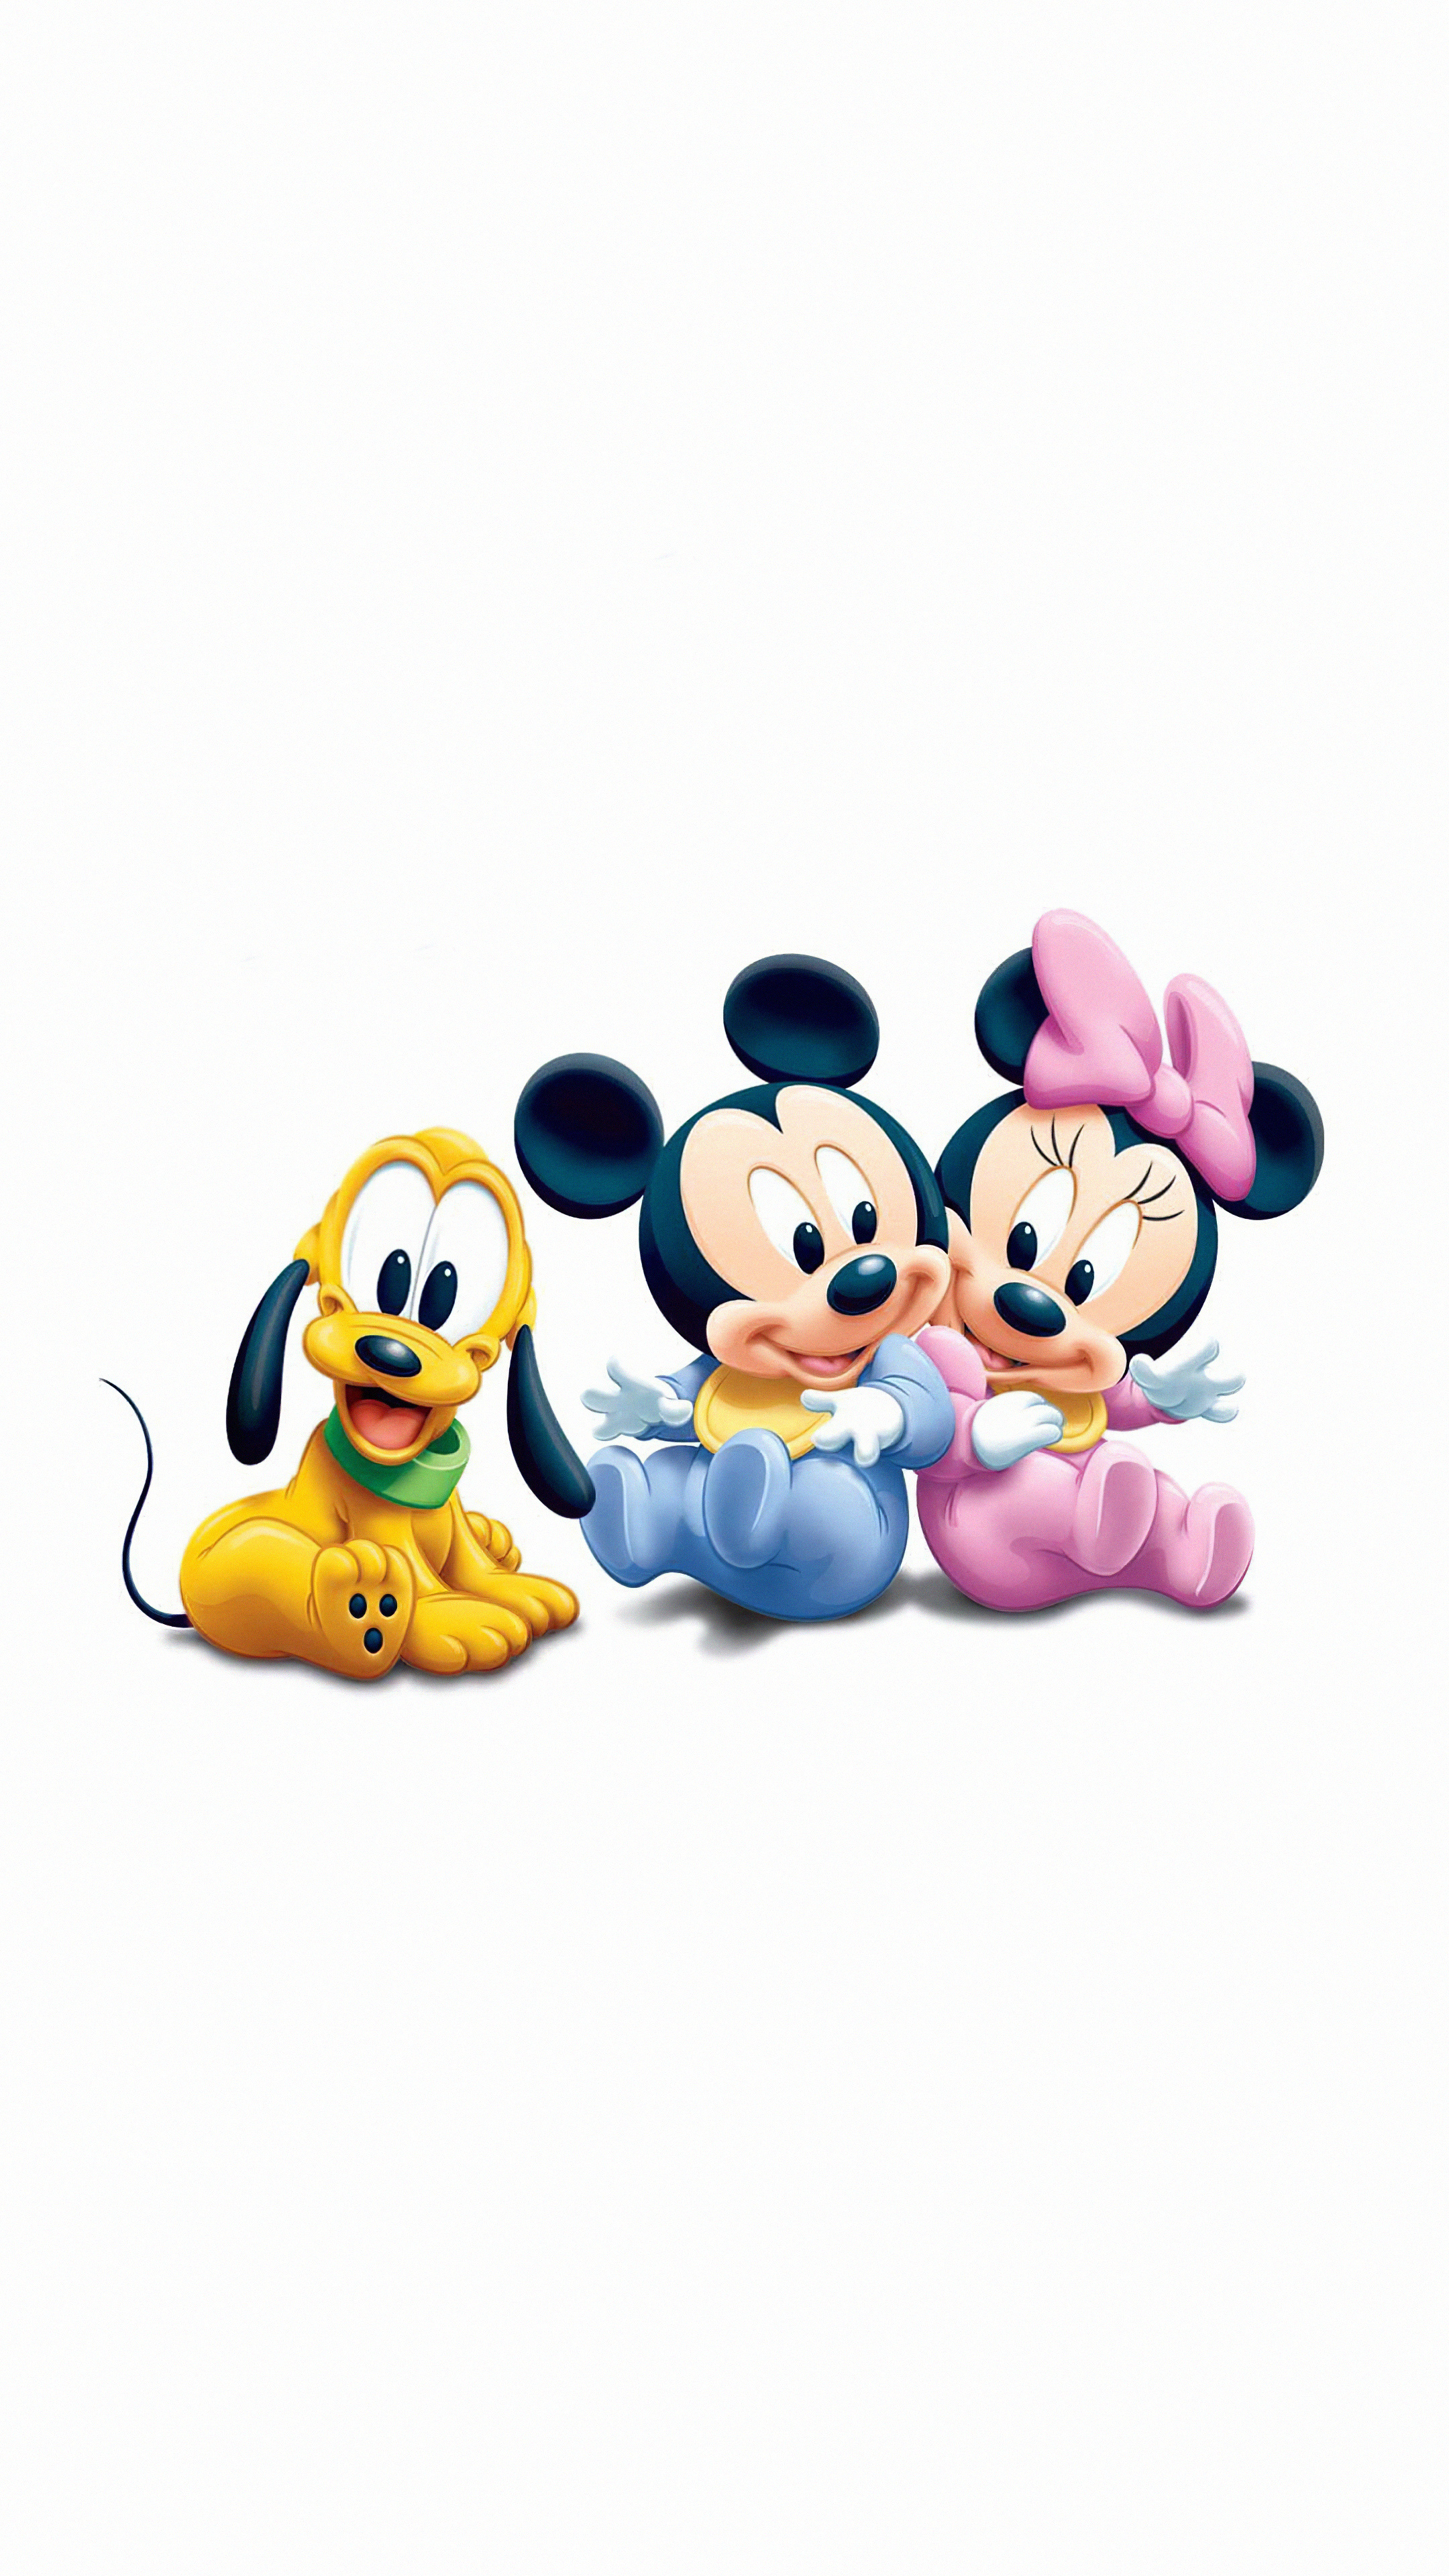 Mickey Mouse and Goofy in 4K, High-res wallpapers, Impressive visuals, 2160x3840 4K Handy